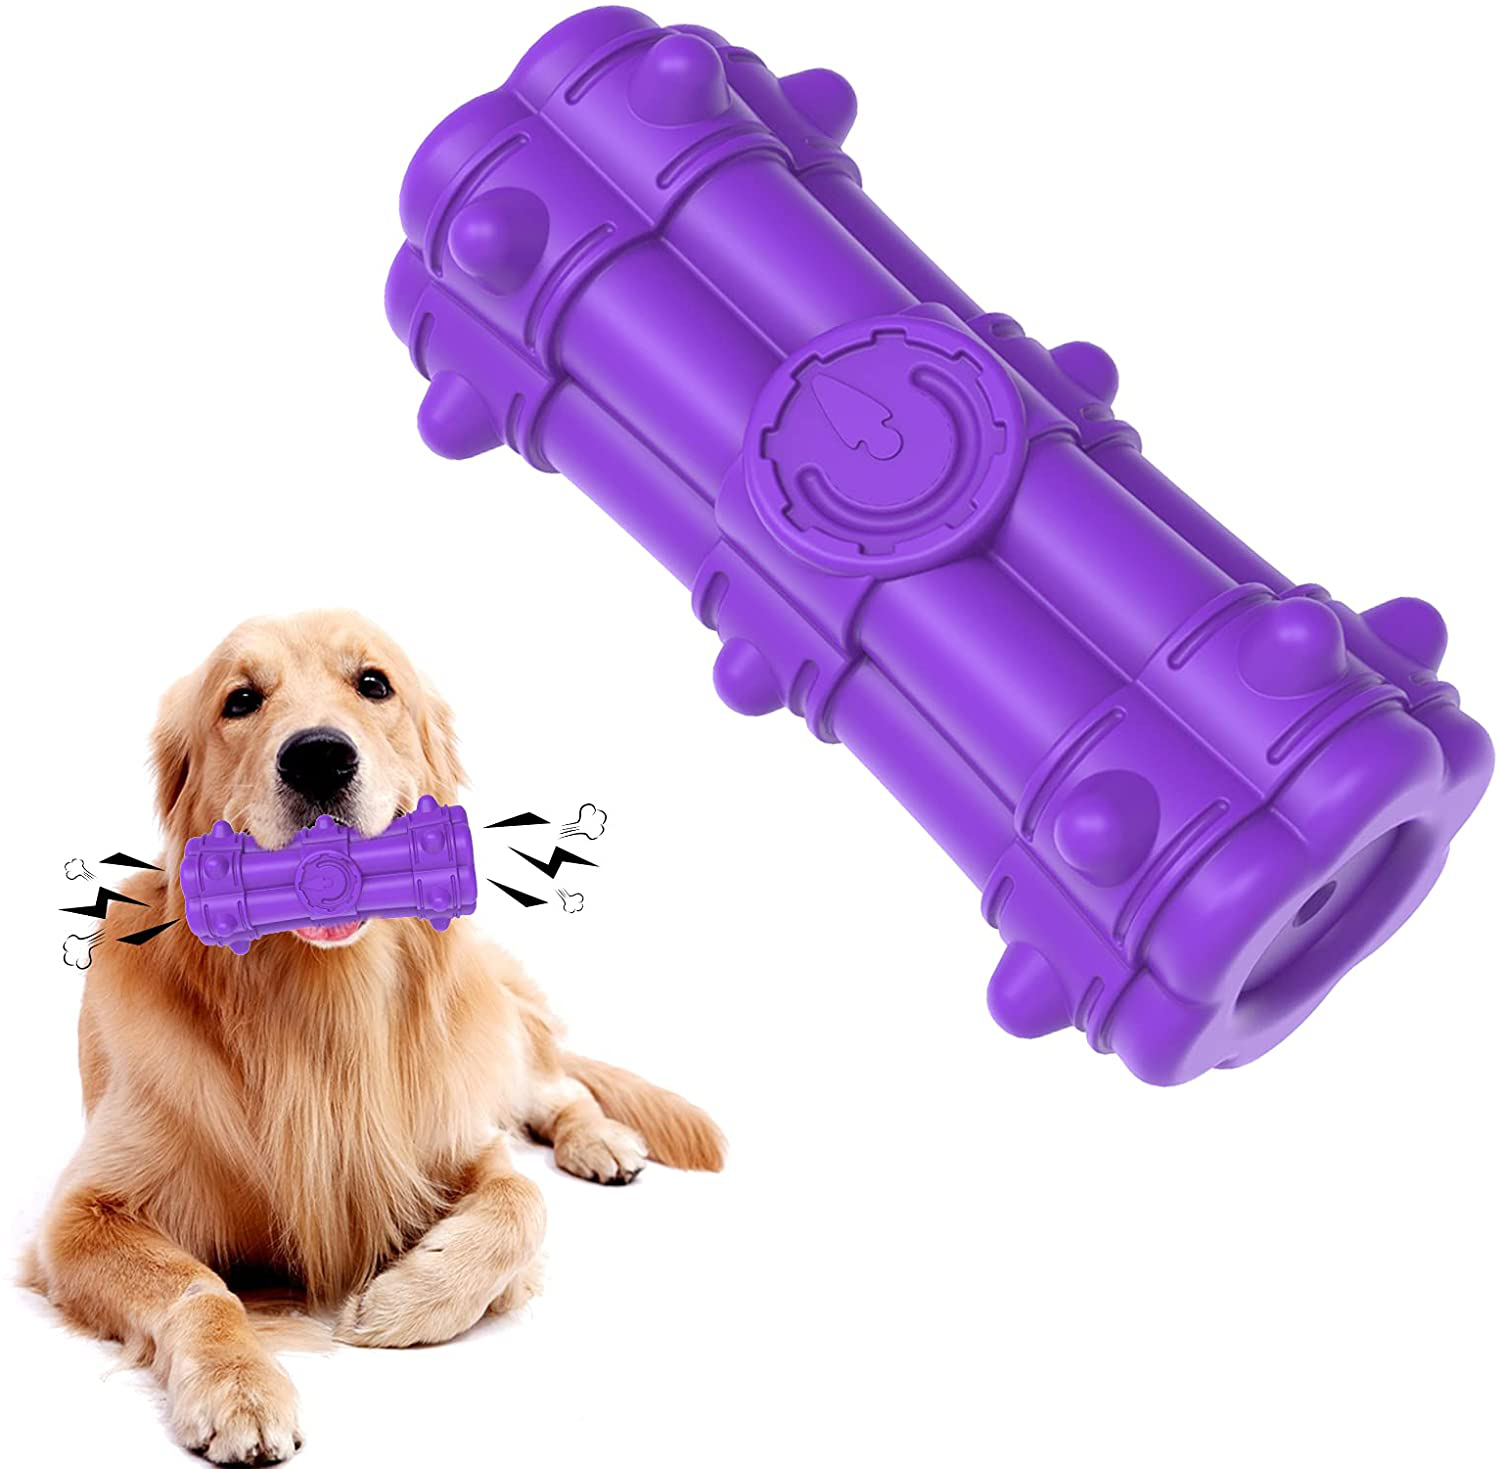 SYEENIFY Dog Toys for Aggressive Chewers Large Breed,Squeaky Dog Toys for Large Medium Dogs Aggressive Chewers,100% Natural Rubber,Milk Flavor